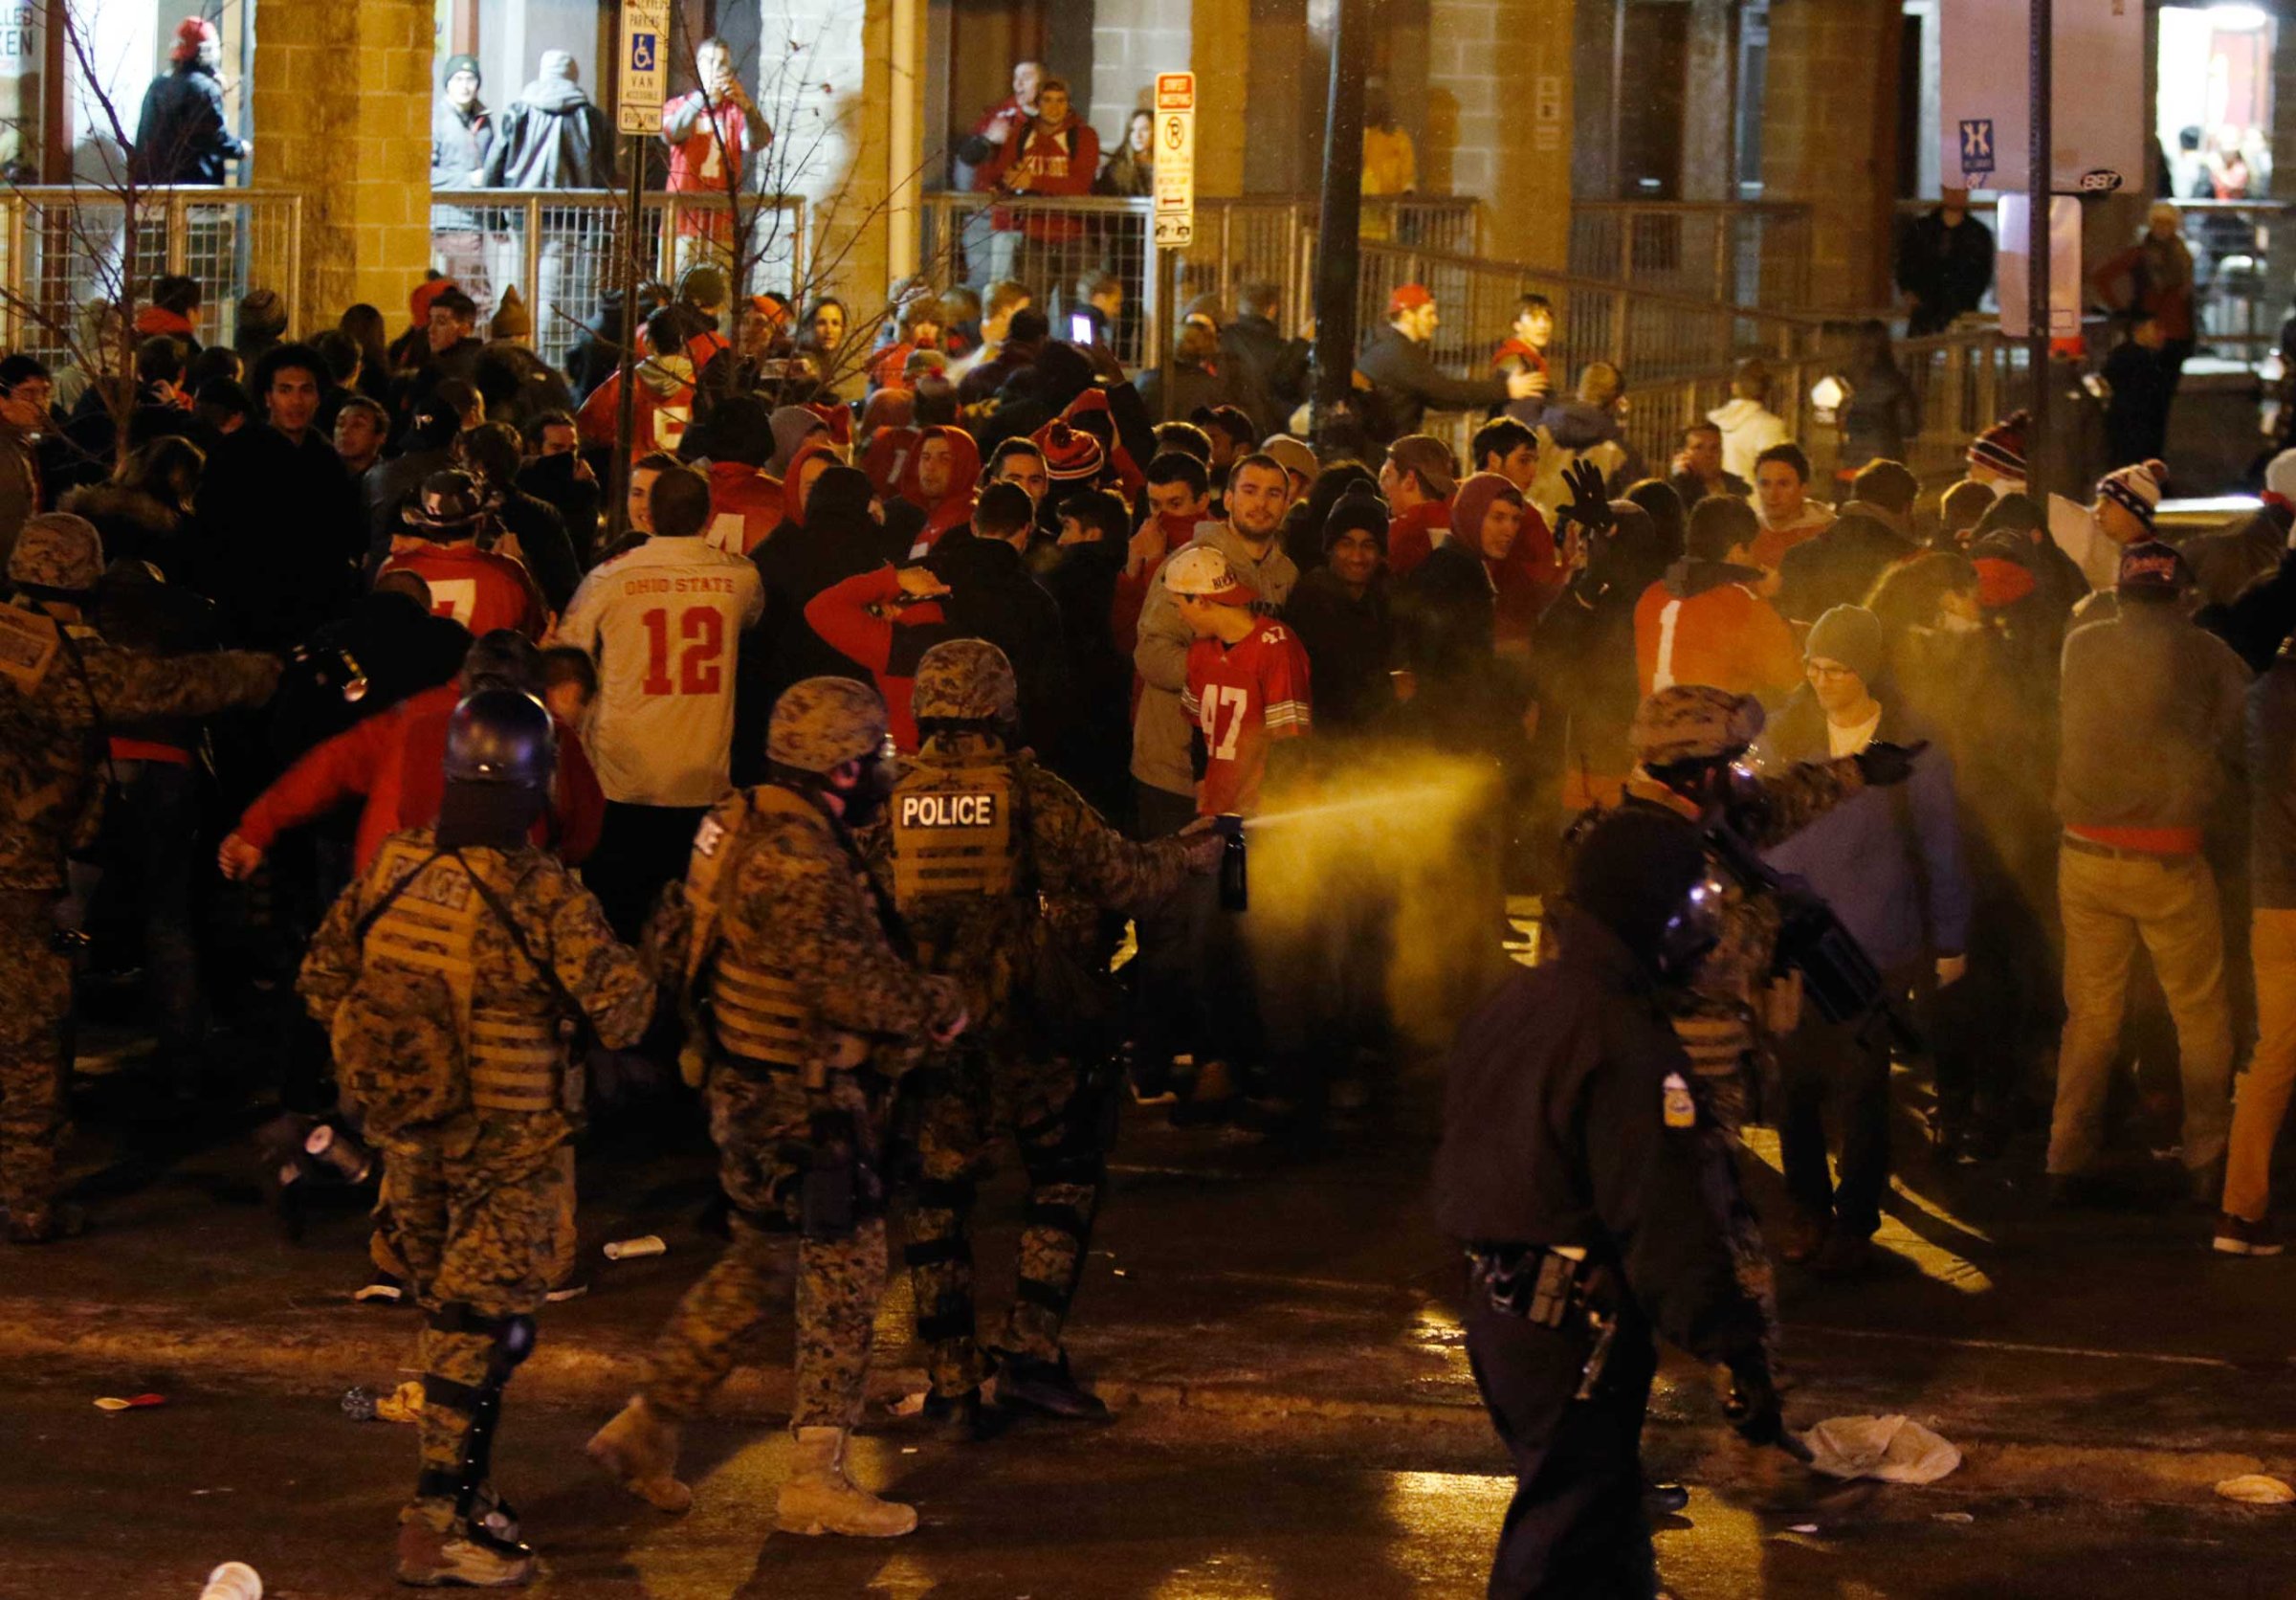 Police officers try to disperse the crowd of Ohio State fans trying to block High Street in Columbus, Ohio, as they celebrate the Buckeye's 42-20 win over Oregon following the National Championship football game between Ohio State and Oregon, Jan. 12, 2015.